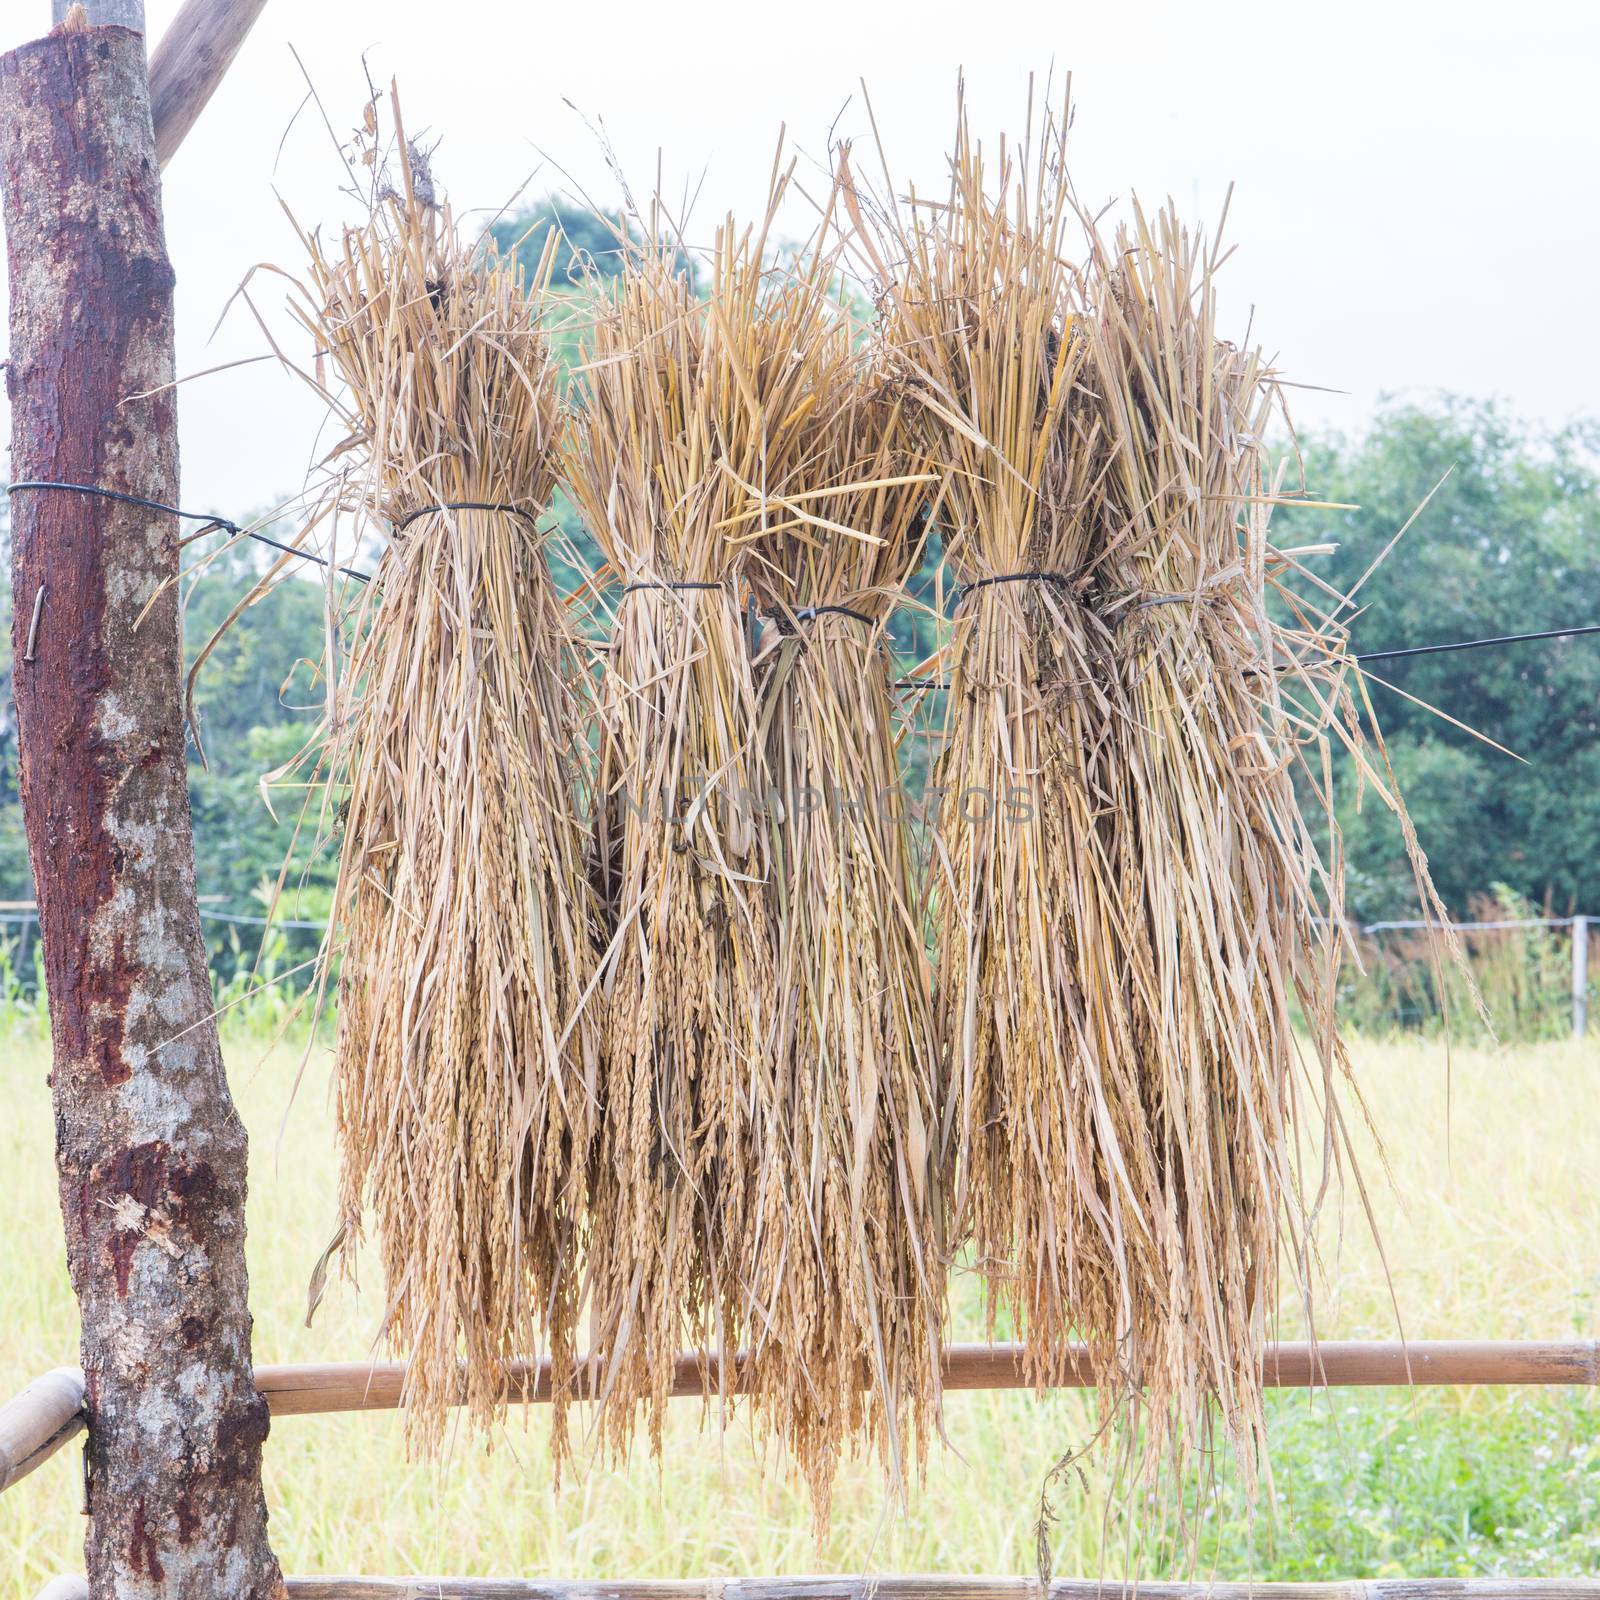 Rice hanging to dry.